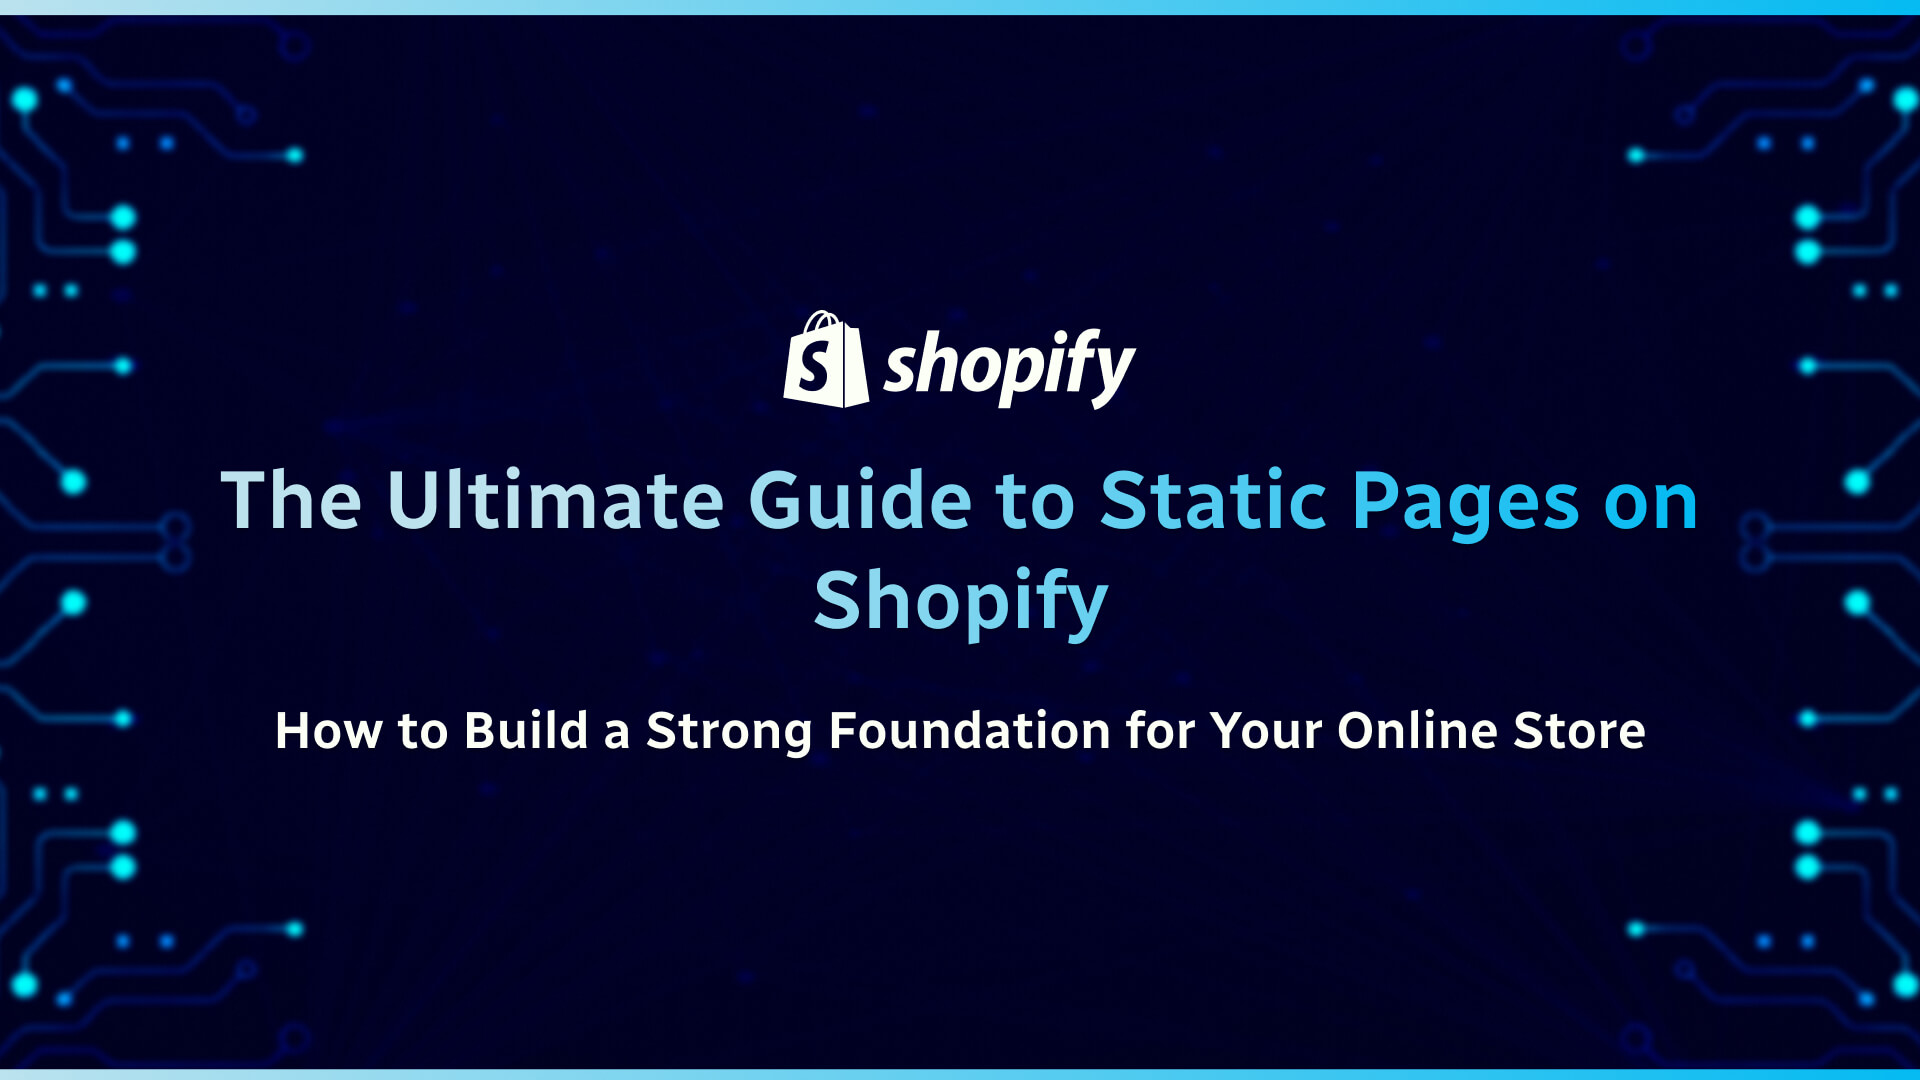 The Ultimate Guide to Static Pages on Shopify_ How to Build a Strong Foundation for Your Online Store